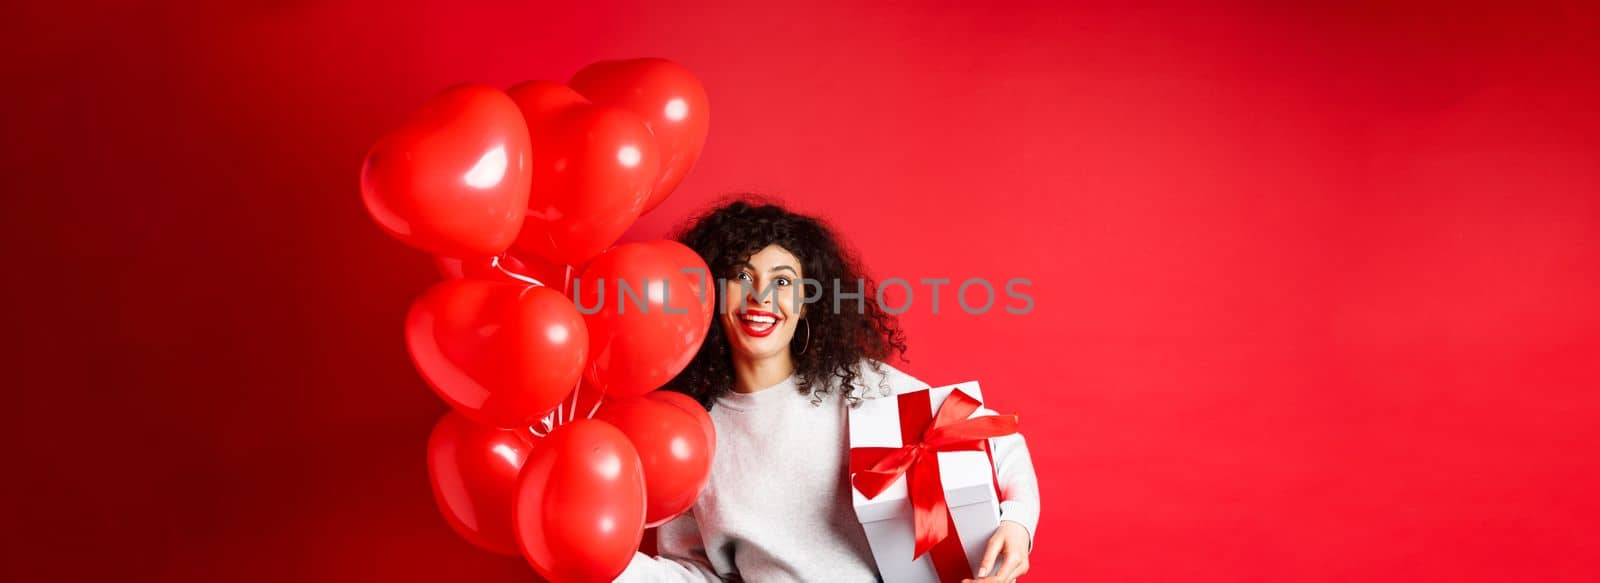 Holidays and celebration. Happy birthday girl holding gift and posing near party helium balloons, smiling excited at camera, red background.